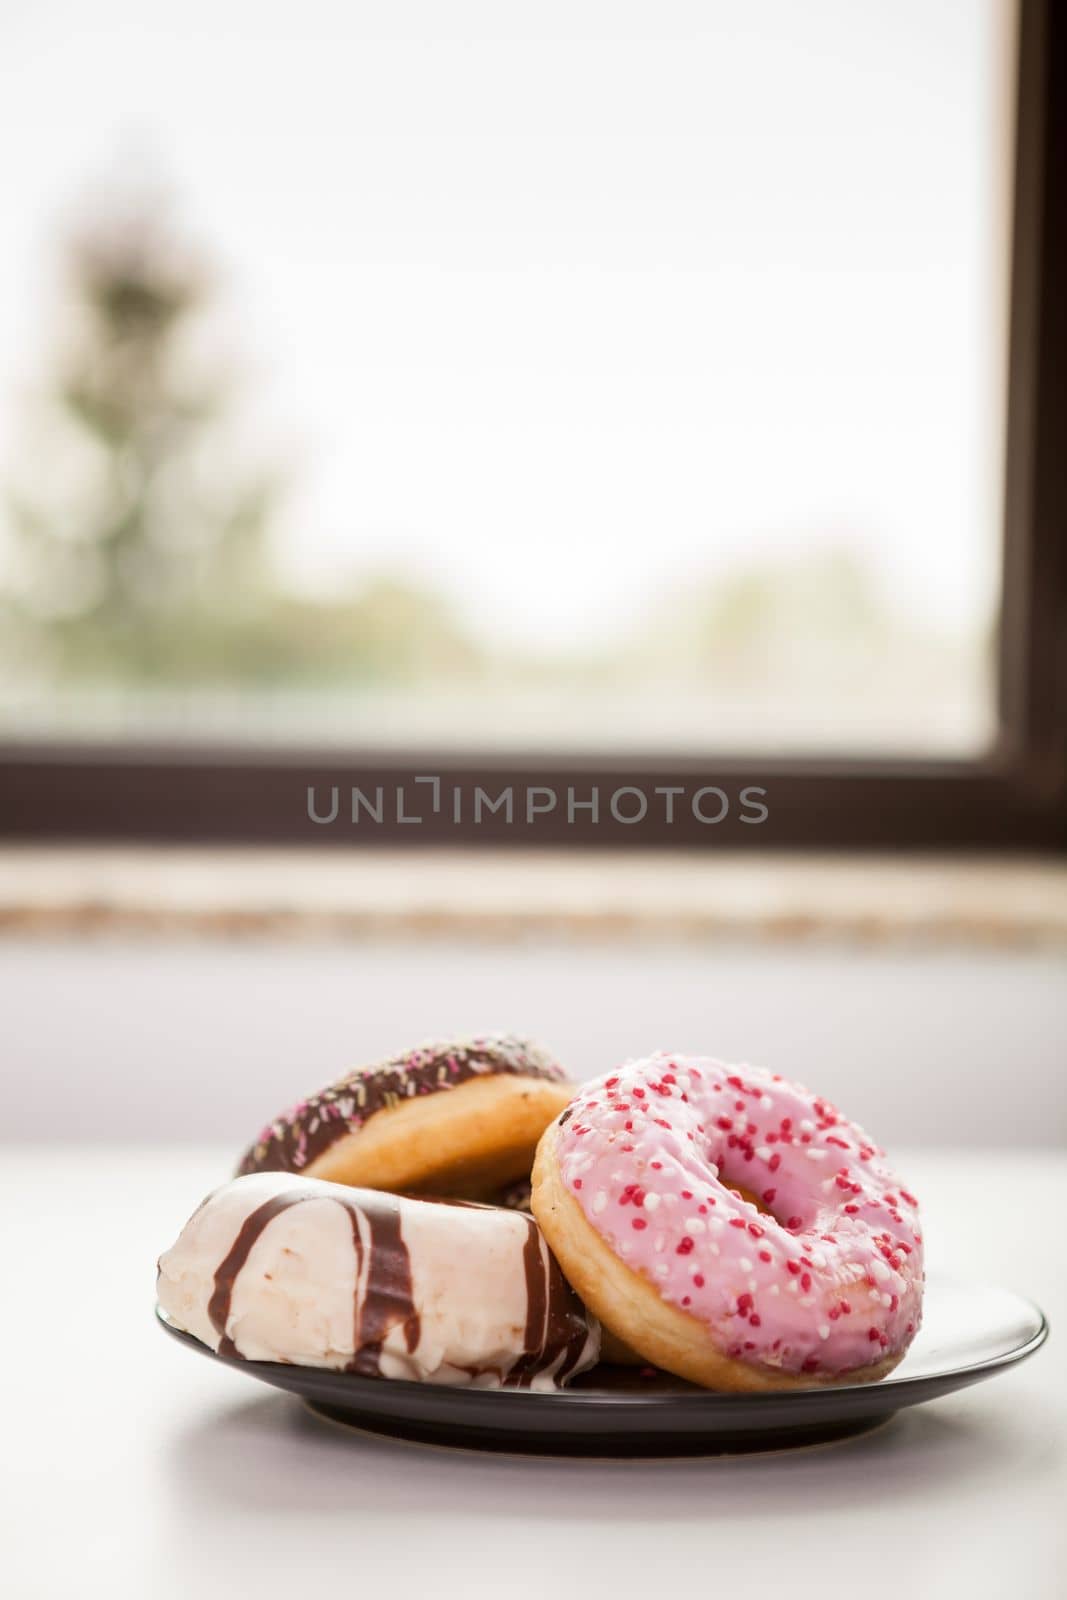 Plate with donuts next to window by DCStudio